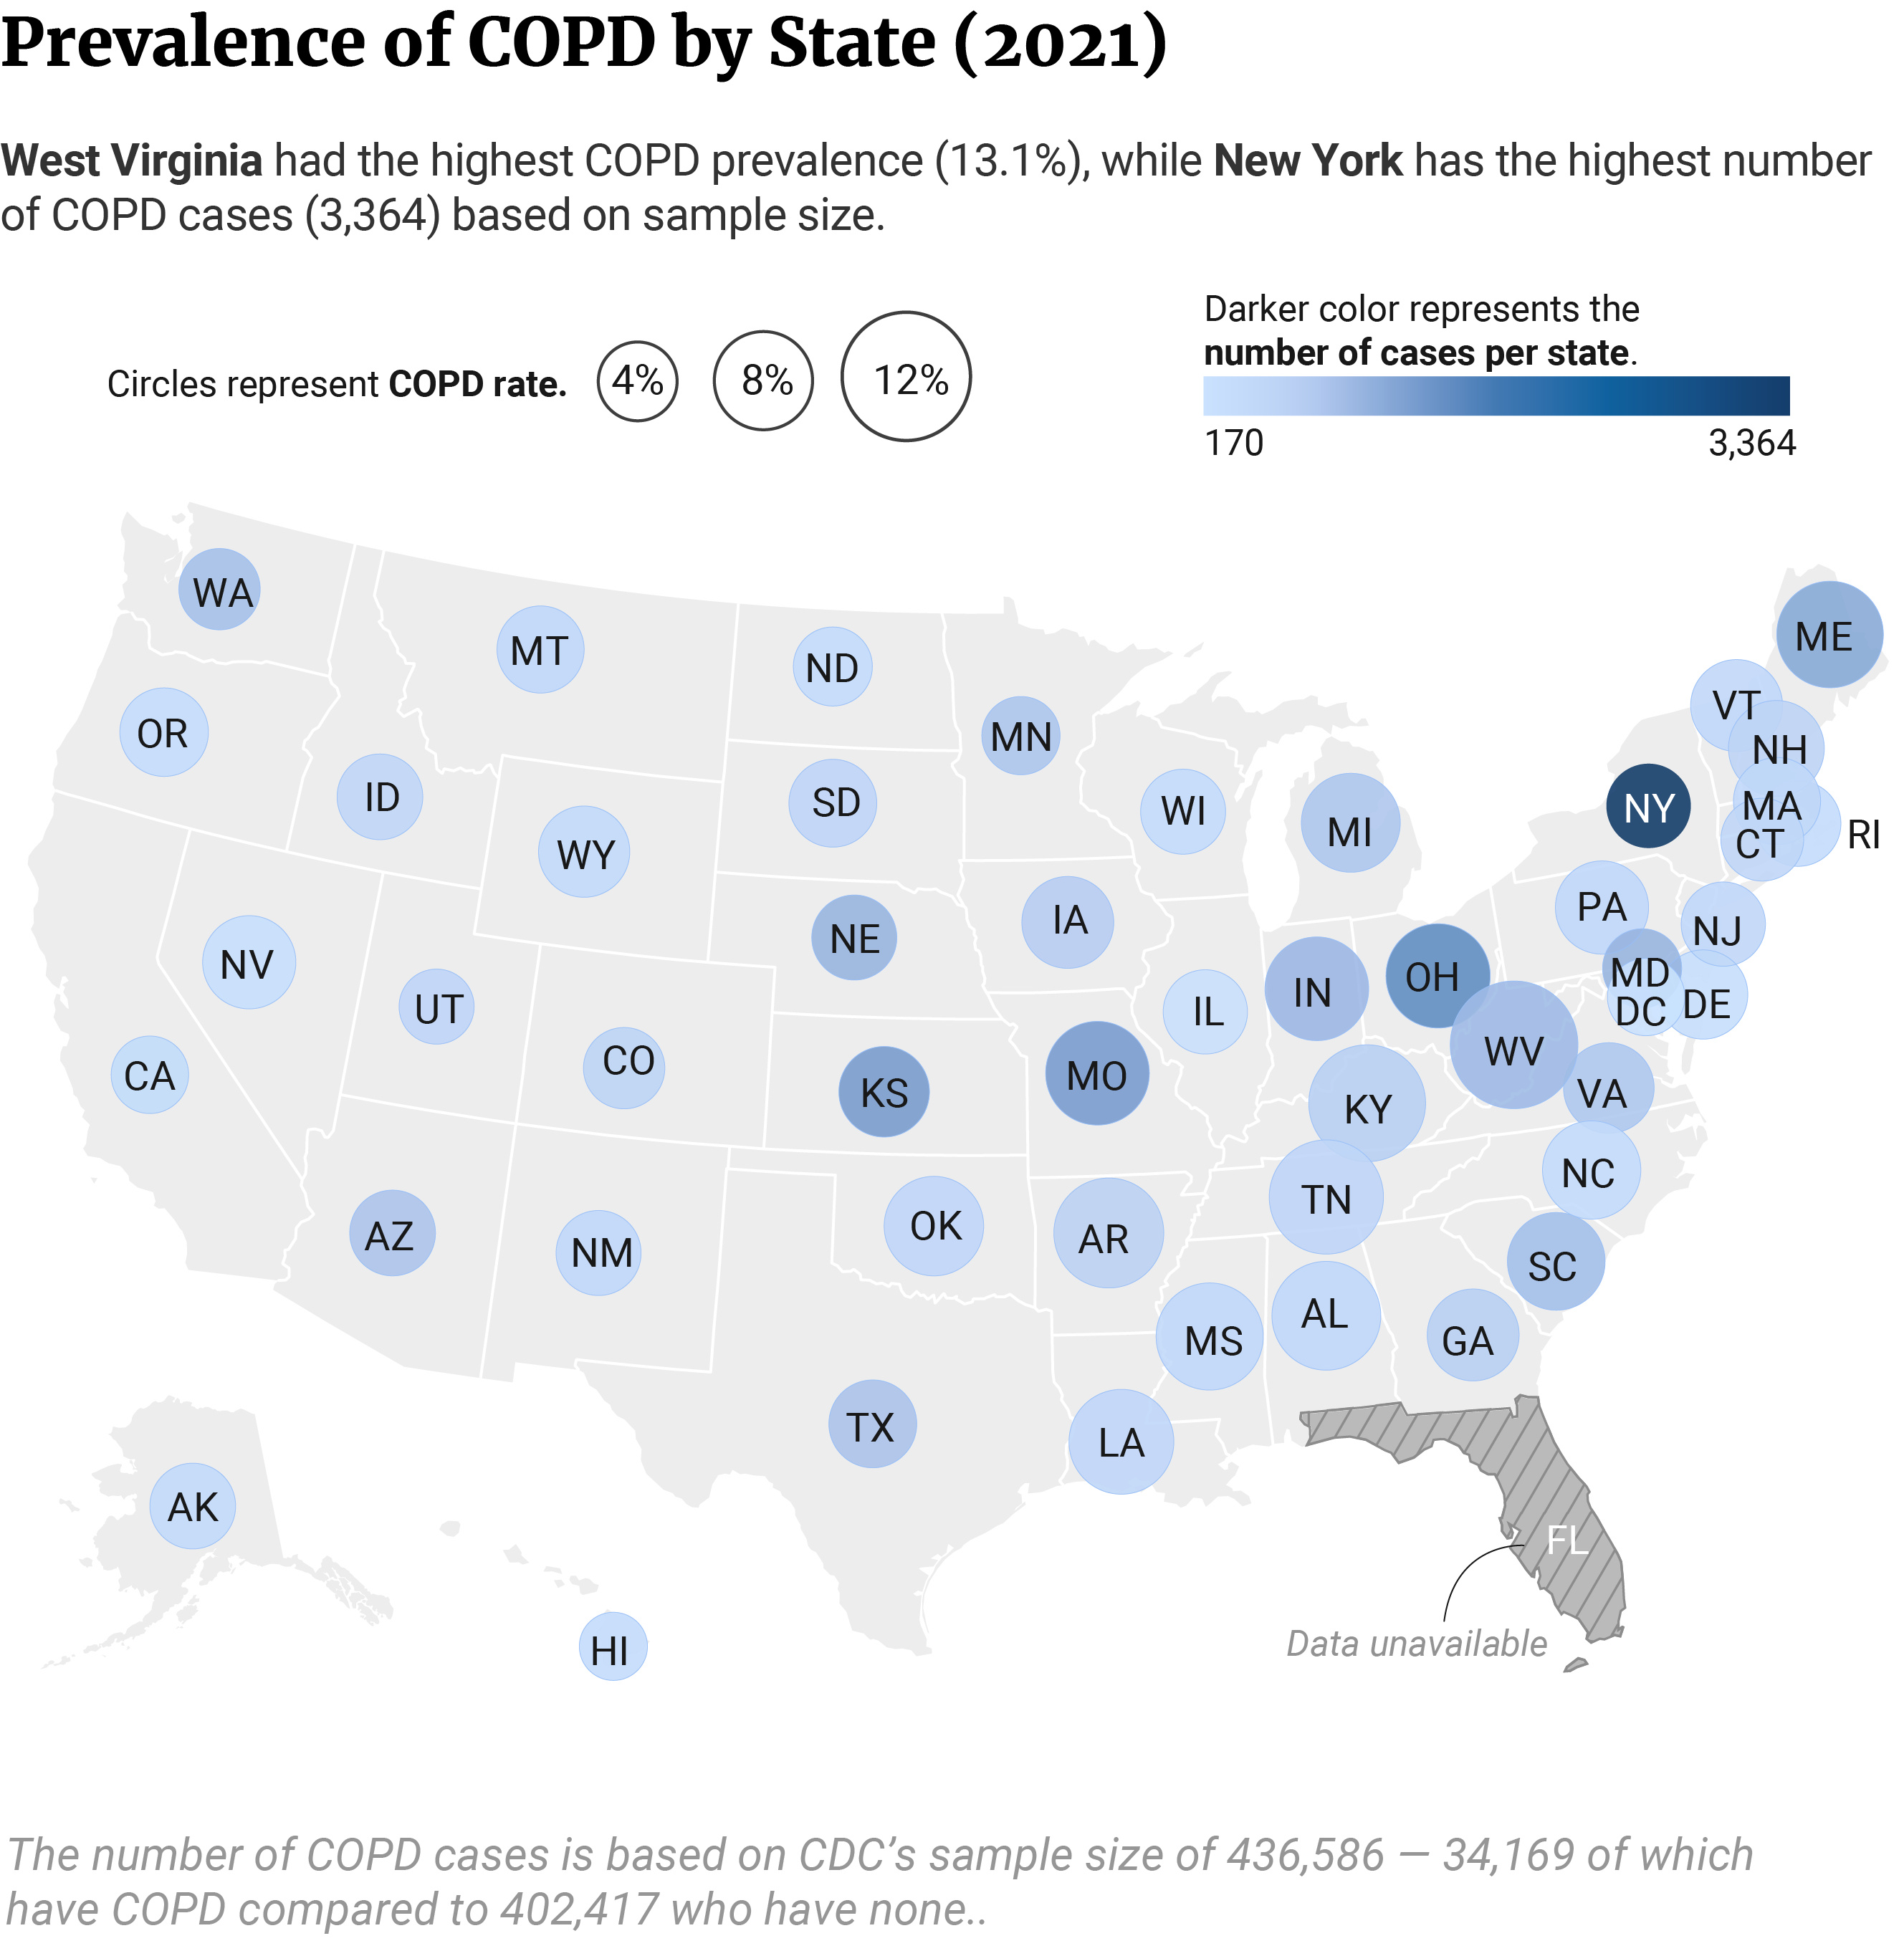 USA map showing COPD rates and number of cases (based on sample size) per state.